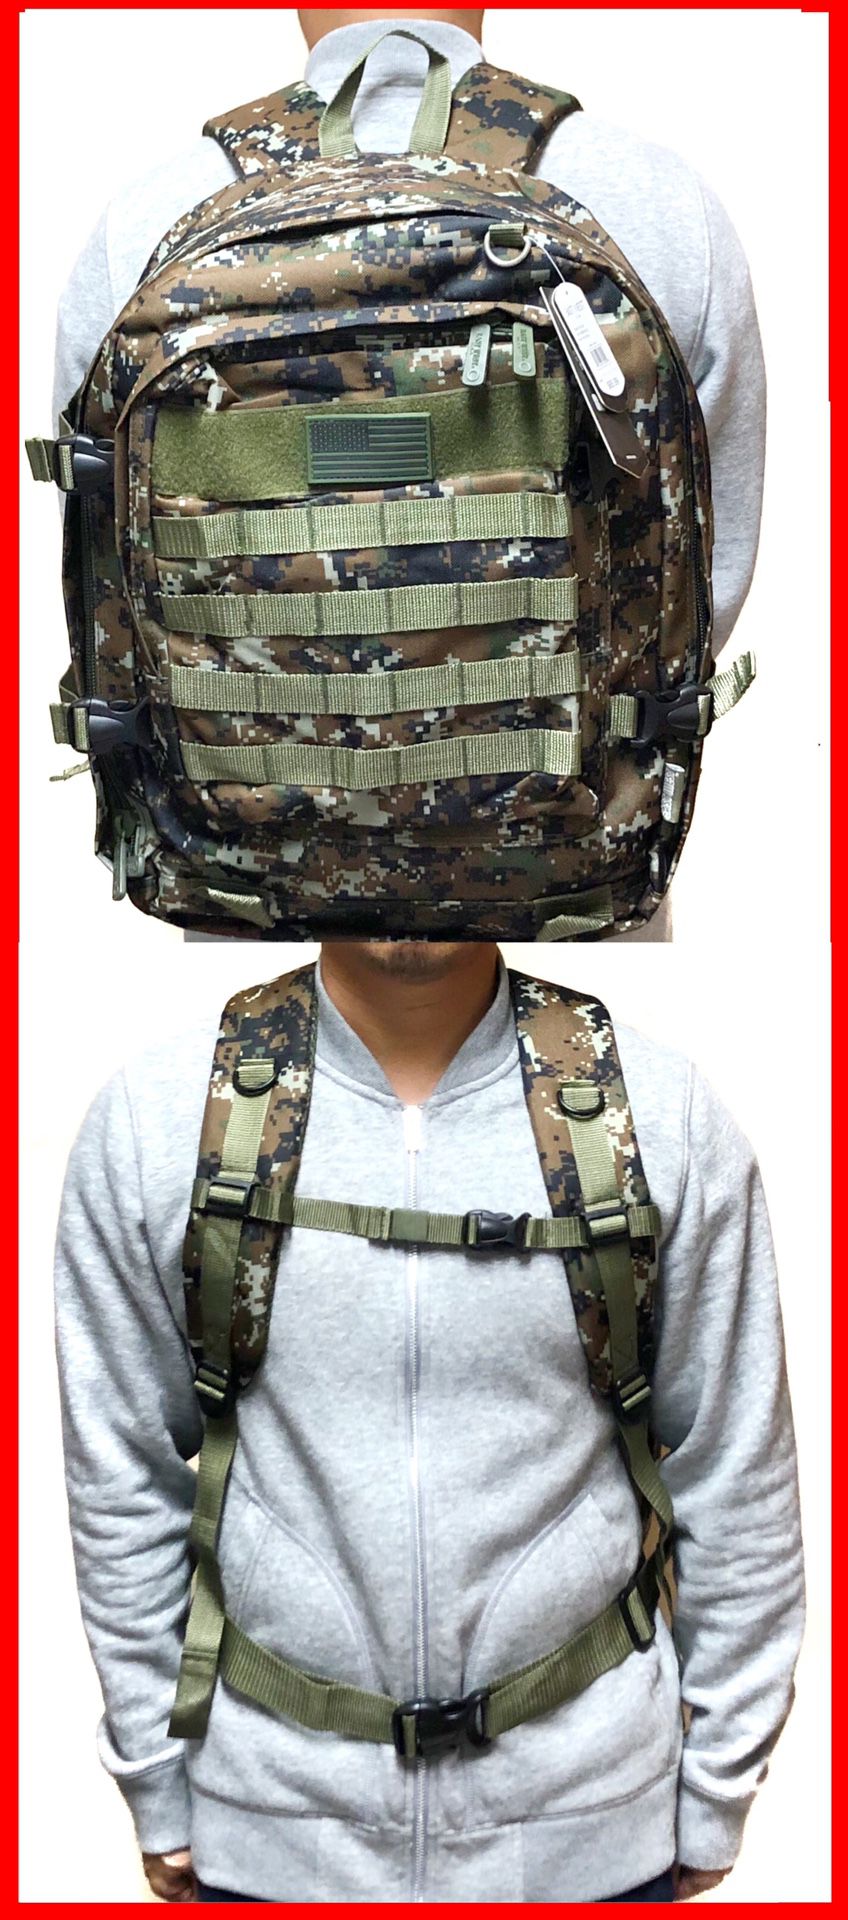 NEW! 3 - Camouflage Tactical military style BACKPACK molle camping fishing hiking drone bag school bag work travel luggage bag gym bag